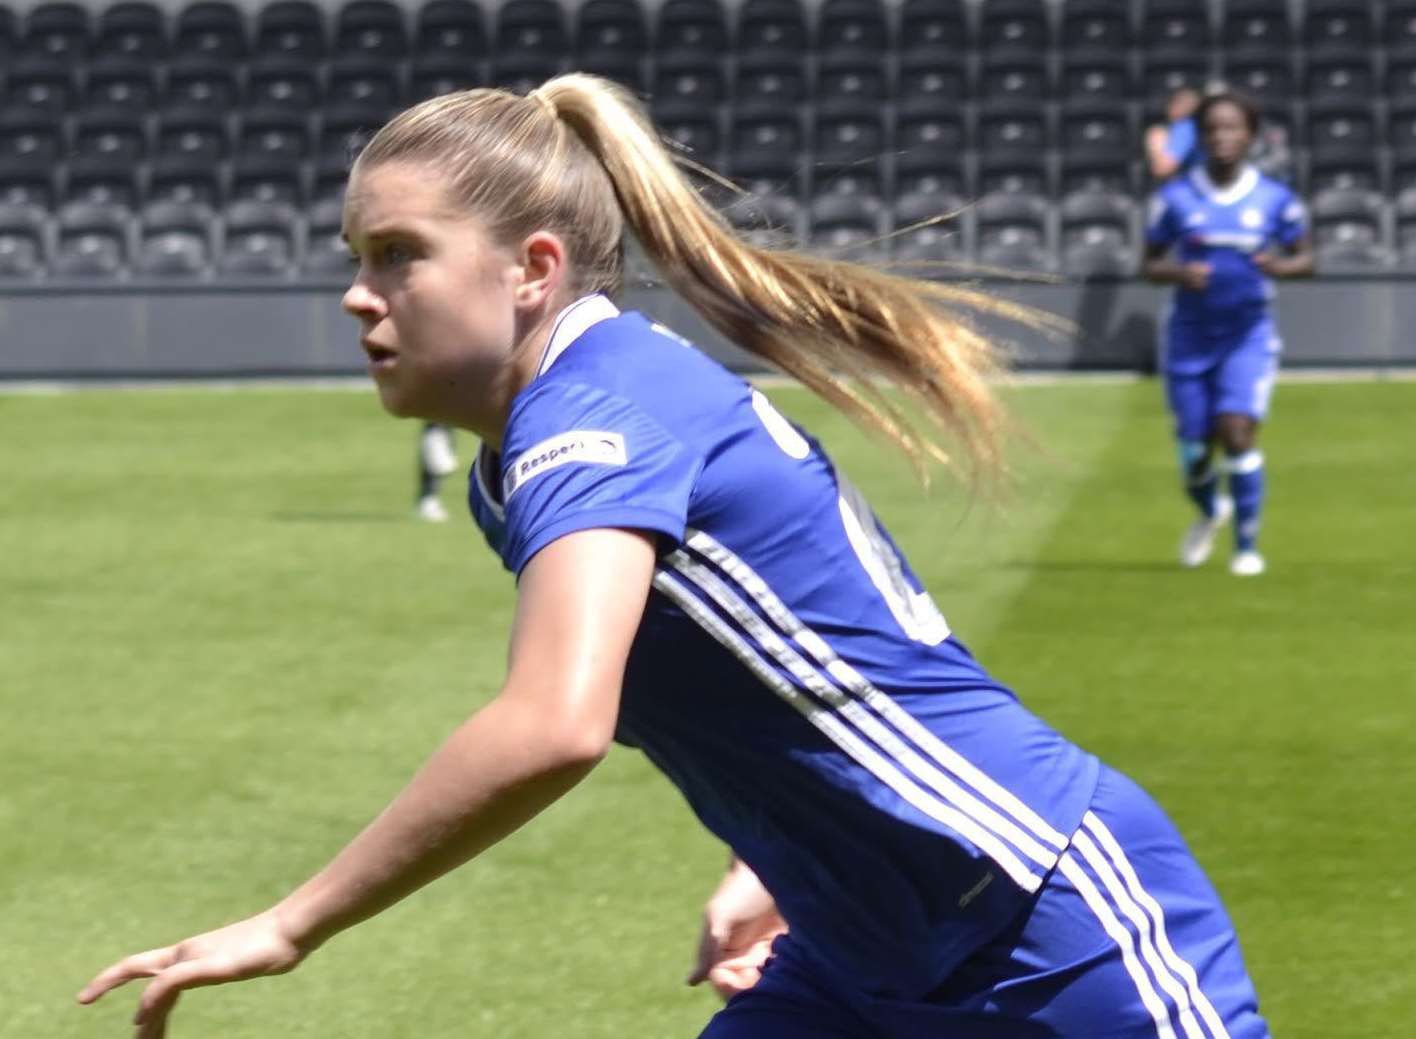 Chelsea and England footballer Alessia Russo targets World Cup in Jordan after starring at European Championships